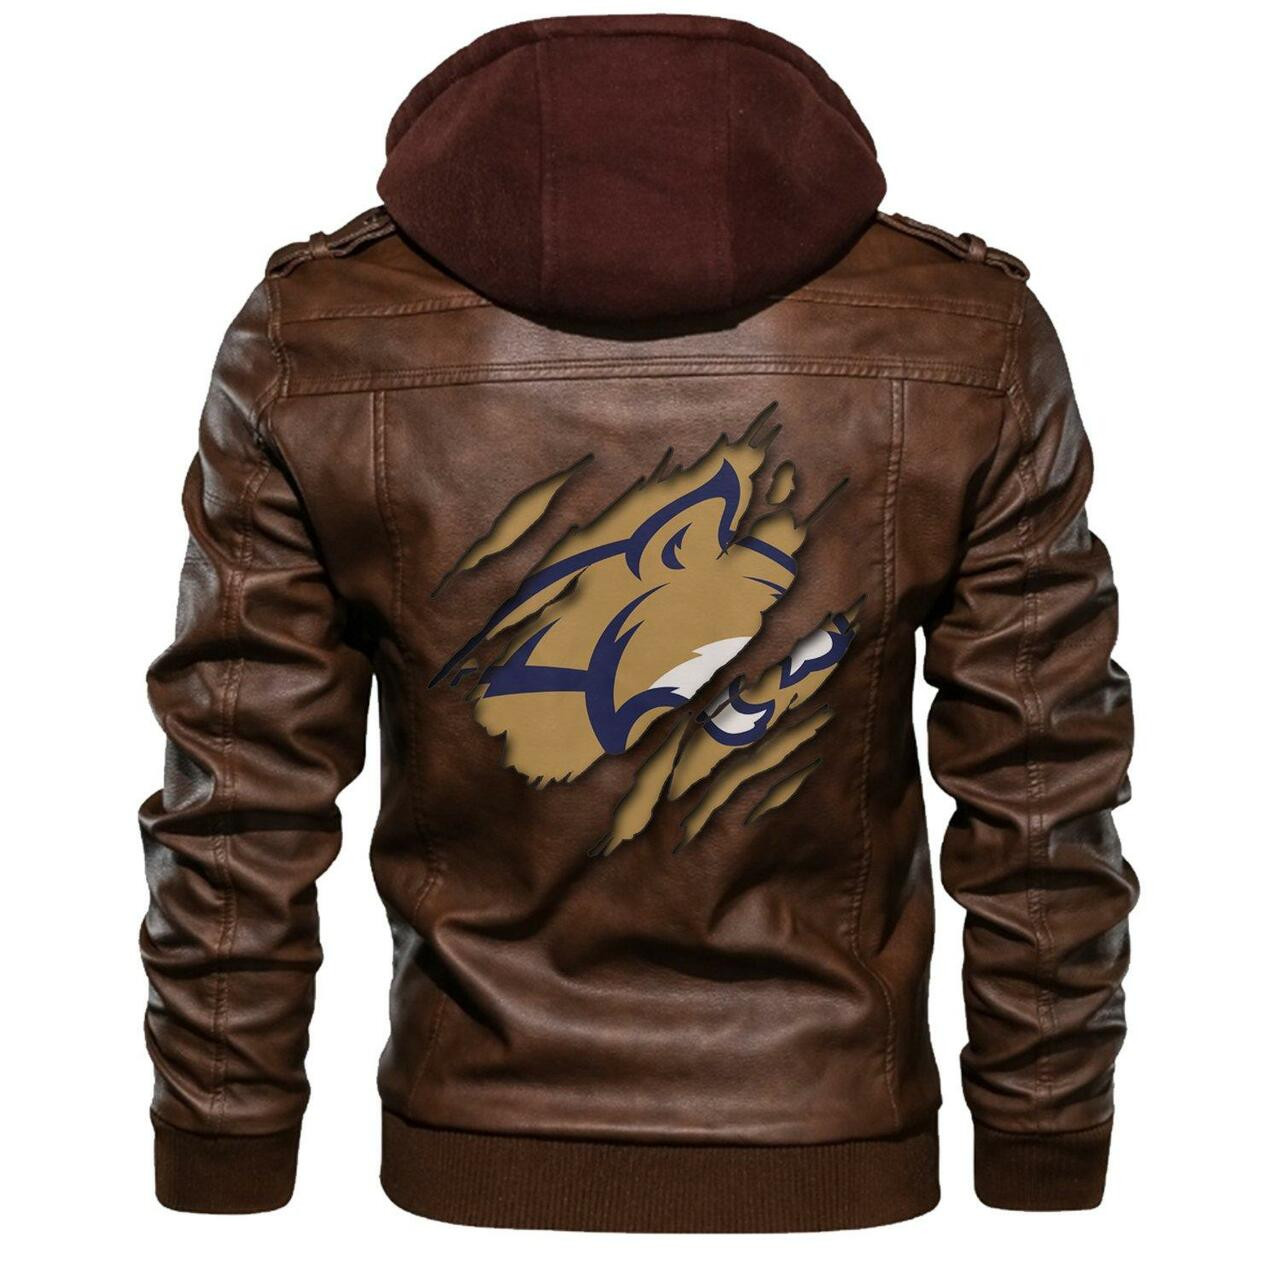 Top leather jackets are the perfect choice for the active man. 271